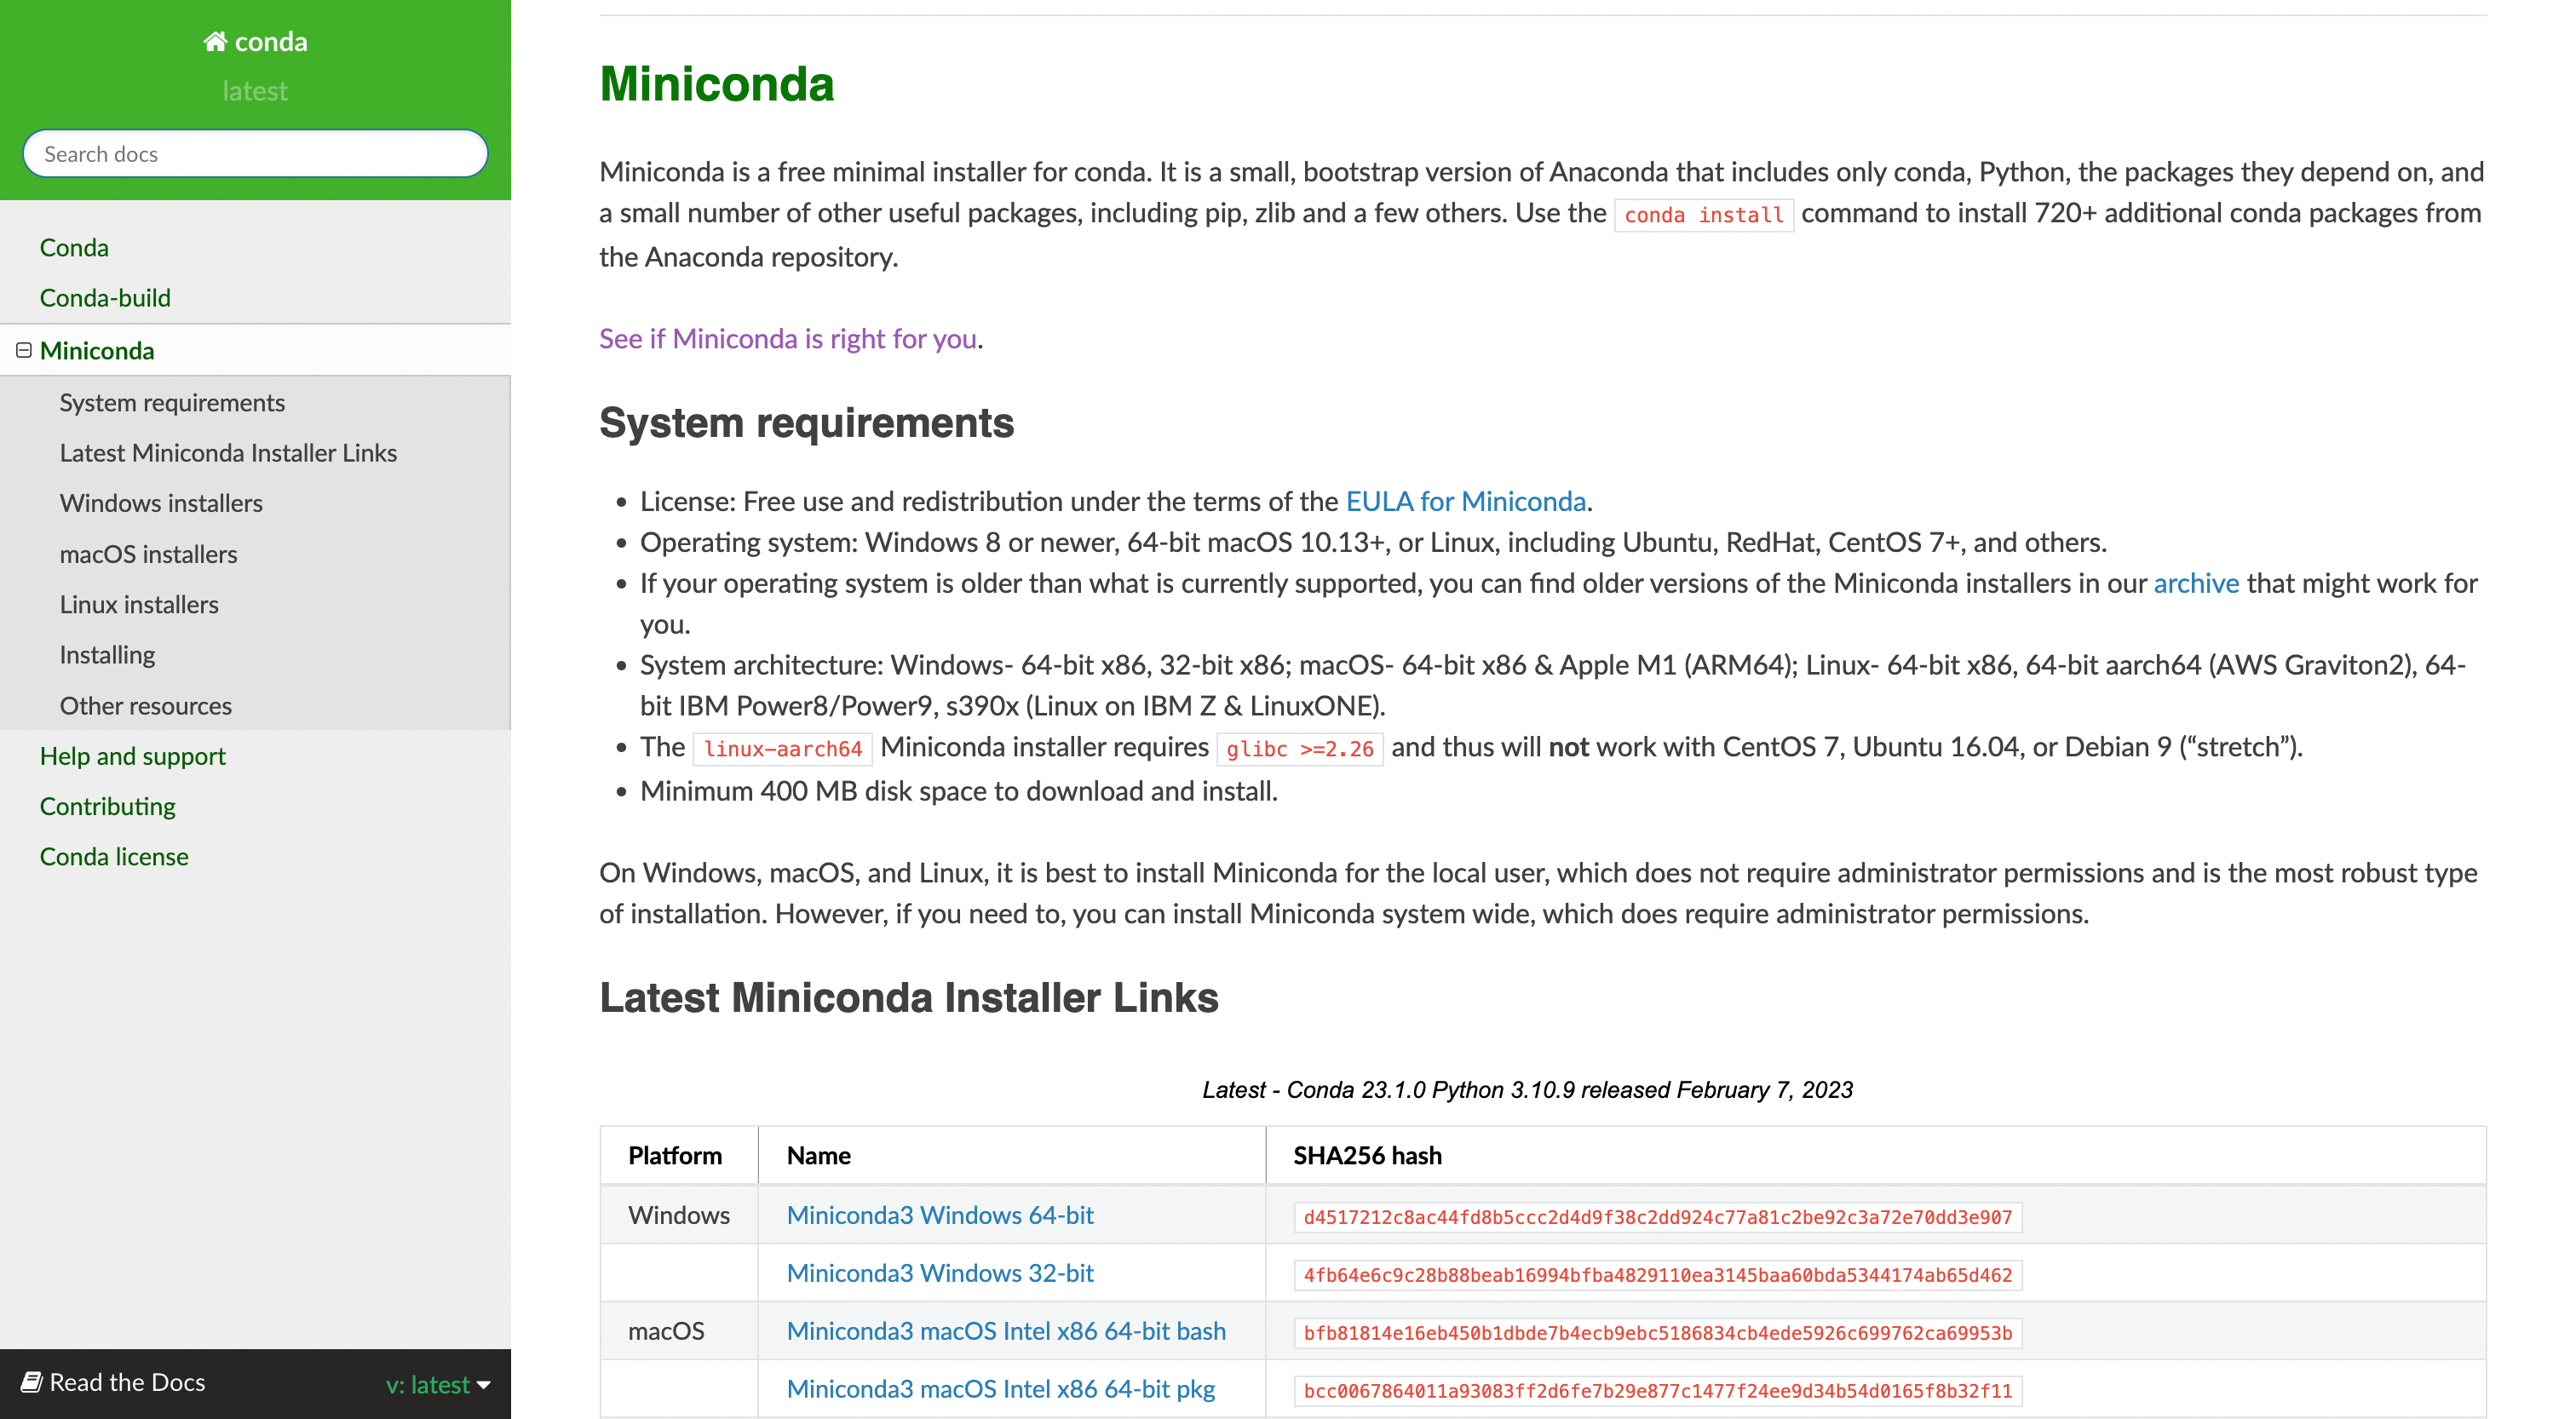 Miniconda is a lightweight distribution that uses lower memory and allows users to specifically manage Python libraries.